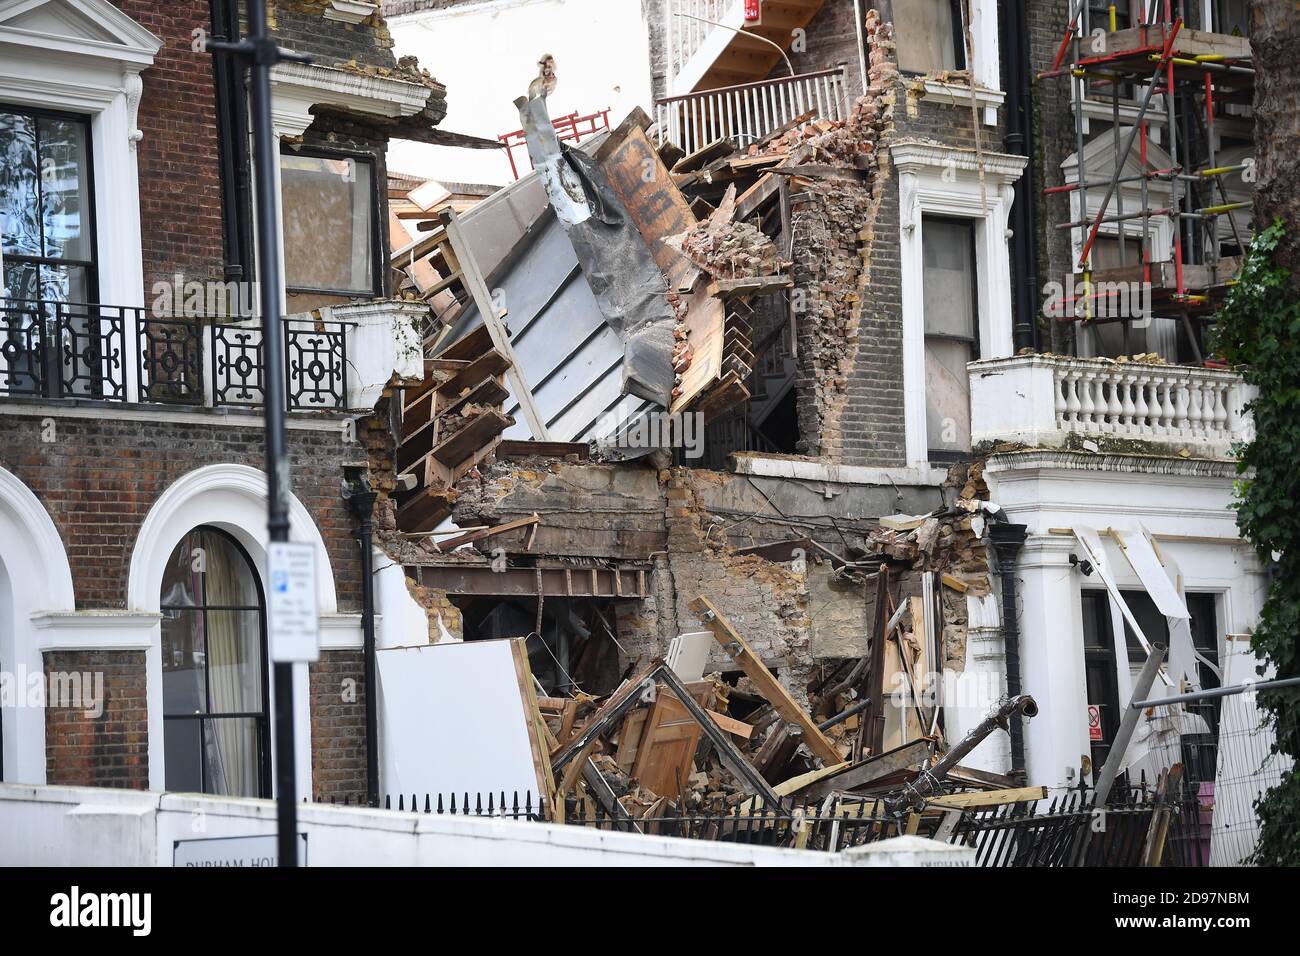 The scene in Durham Place in Chelsea, west London, after two mid-terrace houses collapsed. The two properties, which were undergoing renovation work, collapsed late on Monday evening, causing emergency services to evacuate nearby homes. Nobody was thought to be hurt, according to the London Fire Brigade. Stock Photo